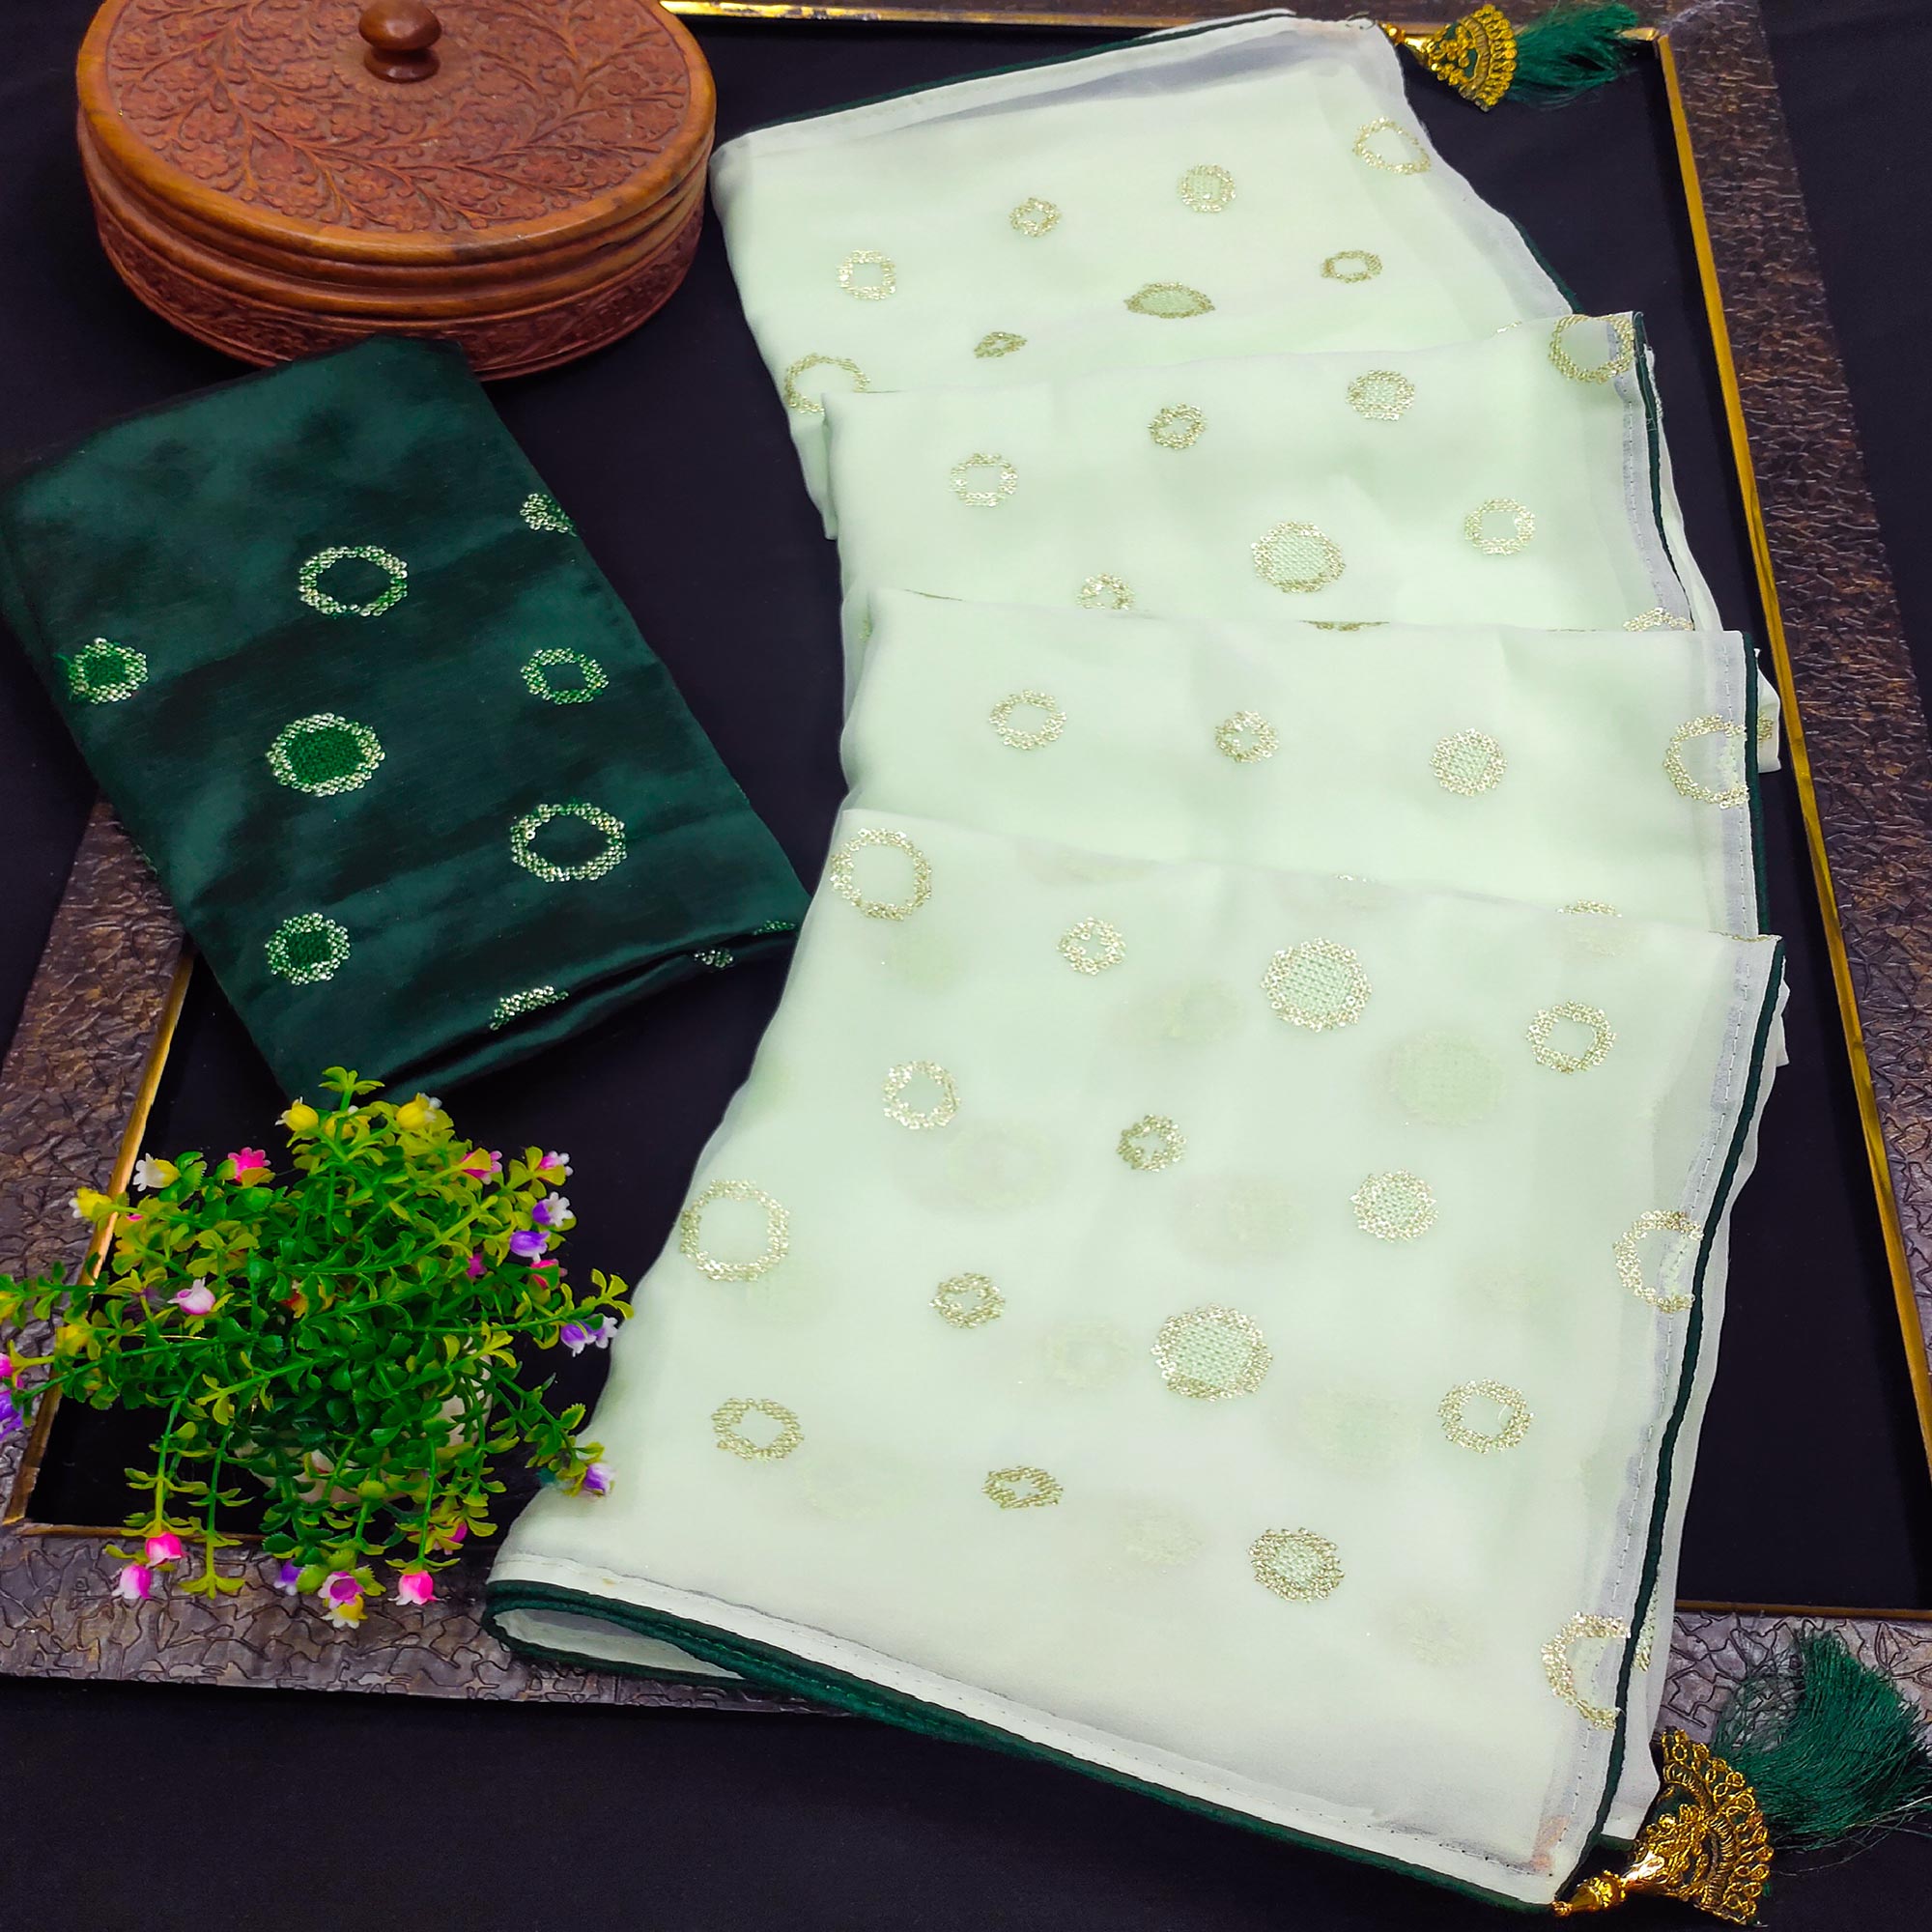 Green Embroidered Georgette Saree